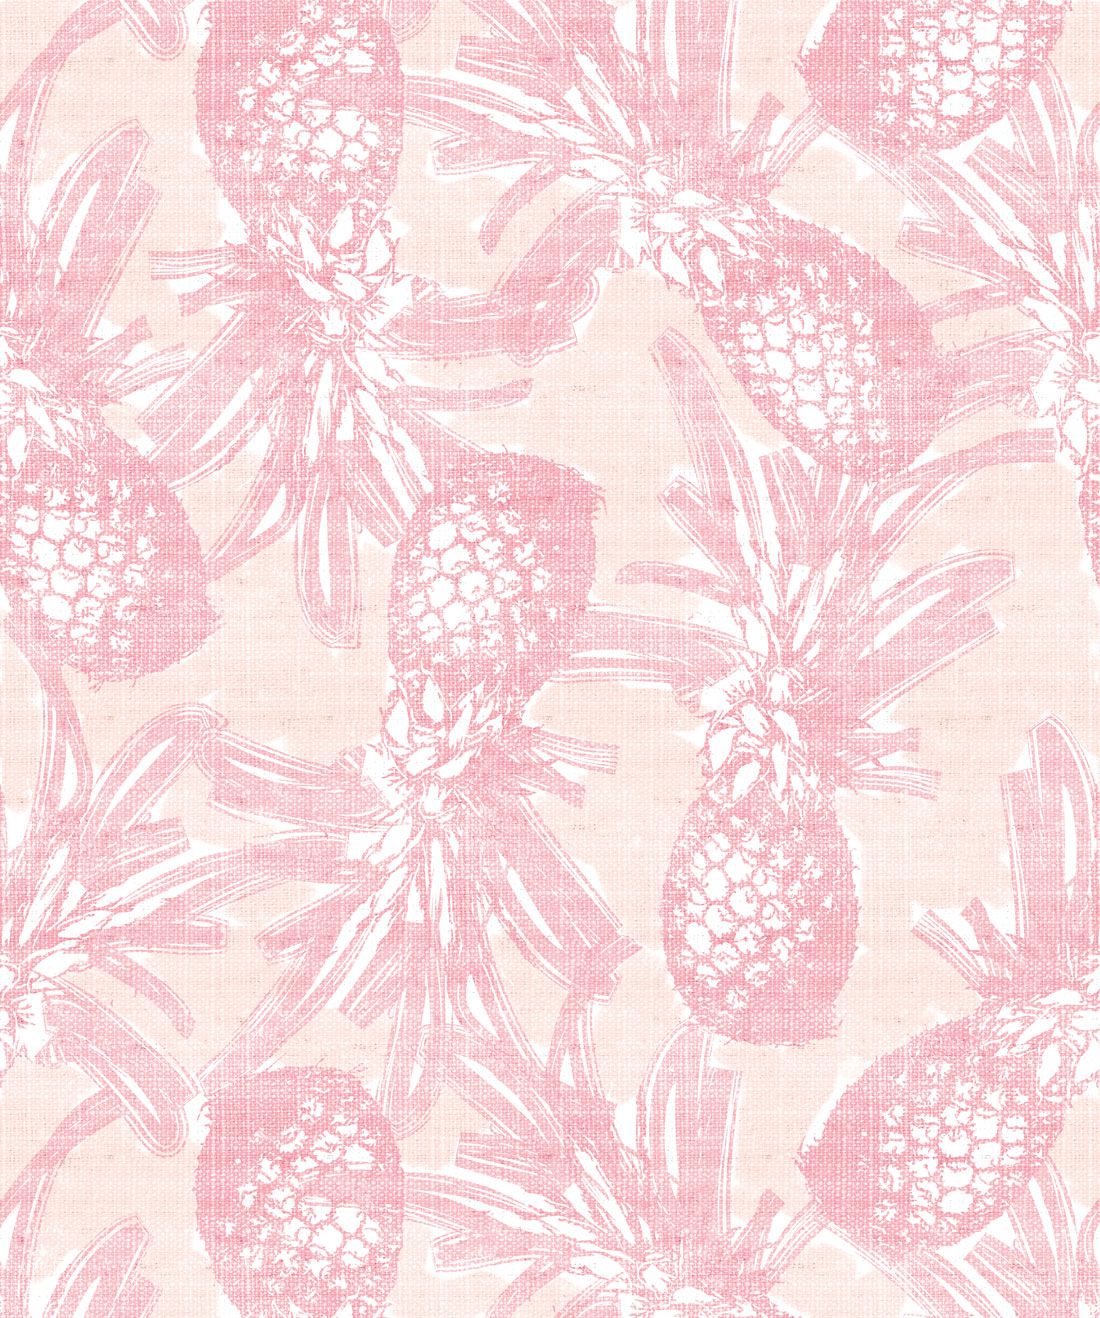 Details More Than Pink Pineapple Wallpaper In Cdgdbentre